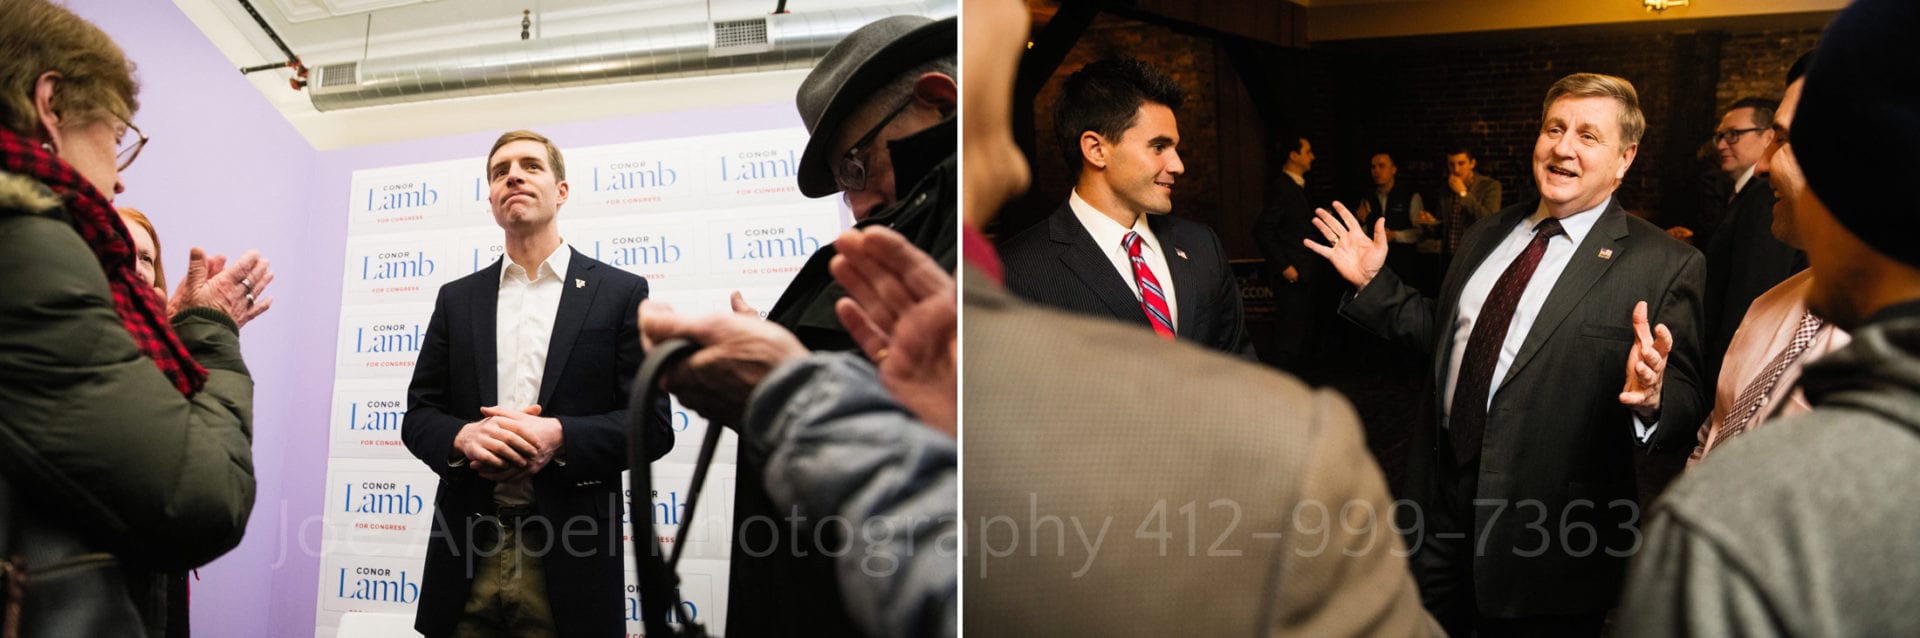 Two photos from different campaign events by an Editorial Photographer in Pittsburgh. In the first photo a tall, young red-headed man wearing a blue jacket and a white shirt with an open collar is surrounded by applauding supporters of his candidacy for congress. In the second photo a middle aged man wearing a suit with a dark red tie holds his hands out as he talks with supporters gathered around him.